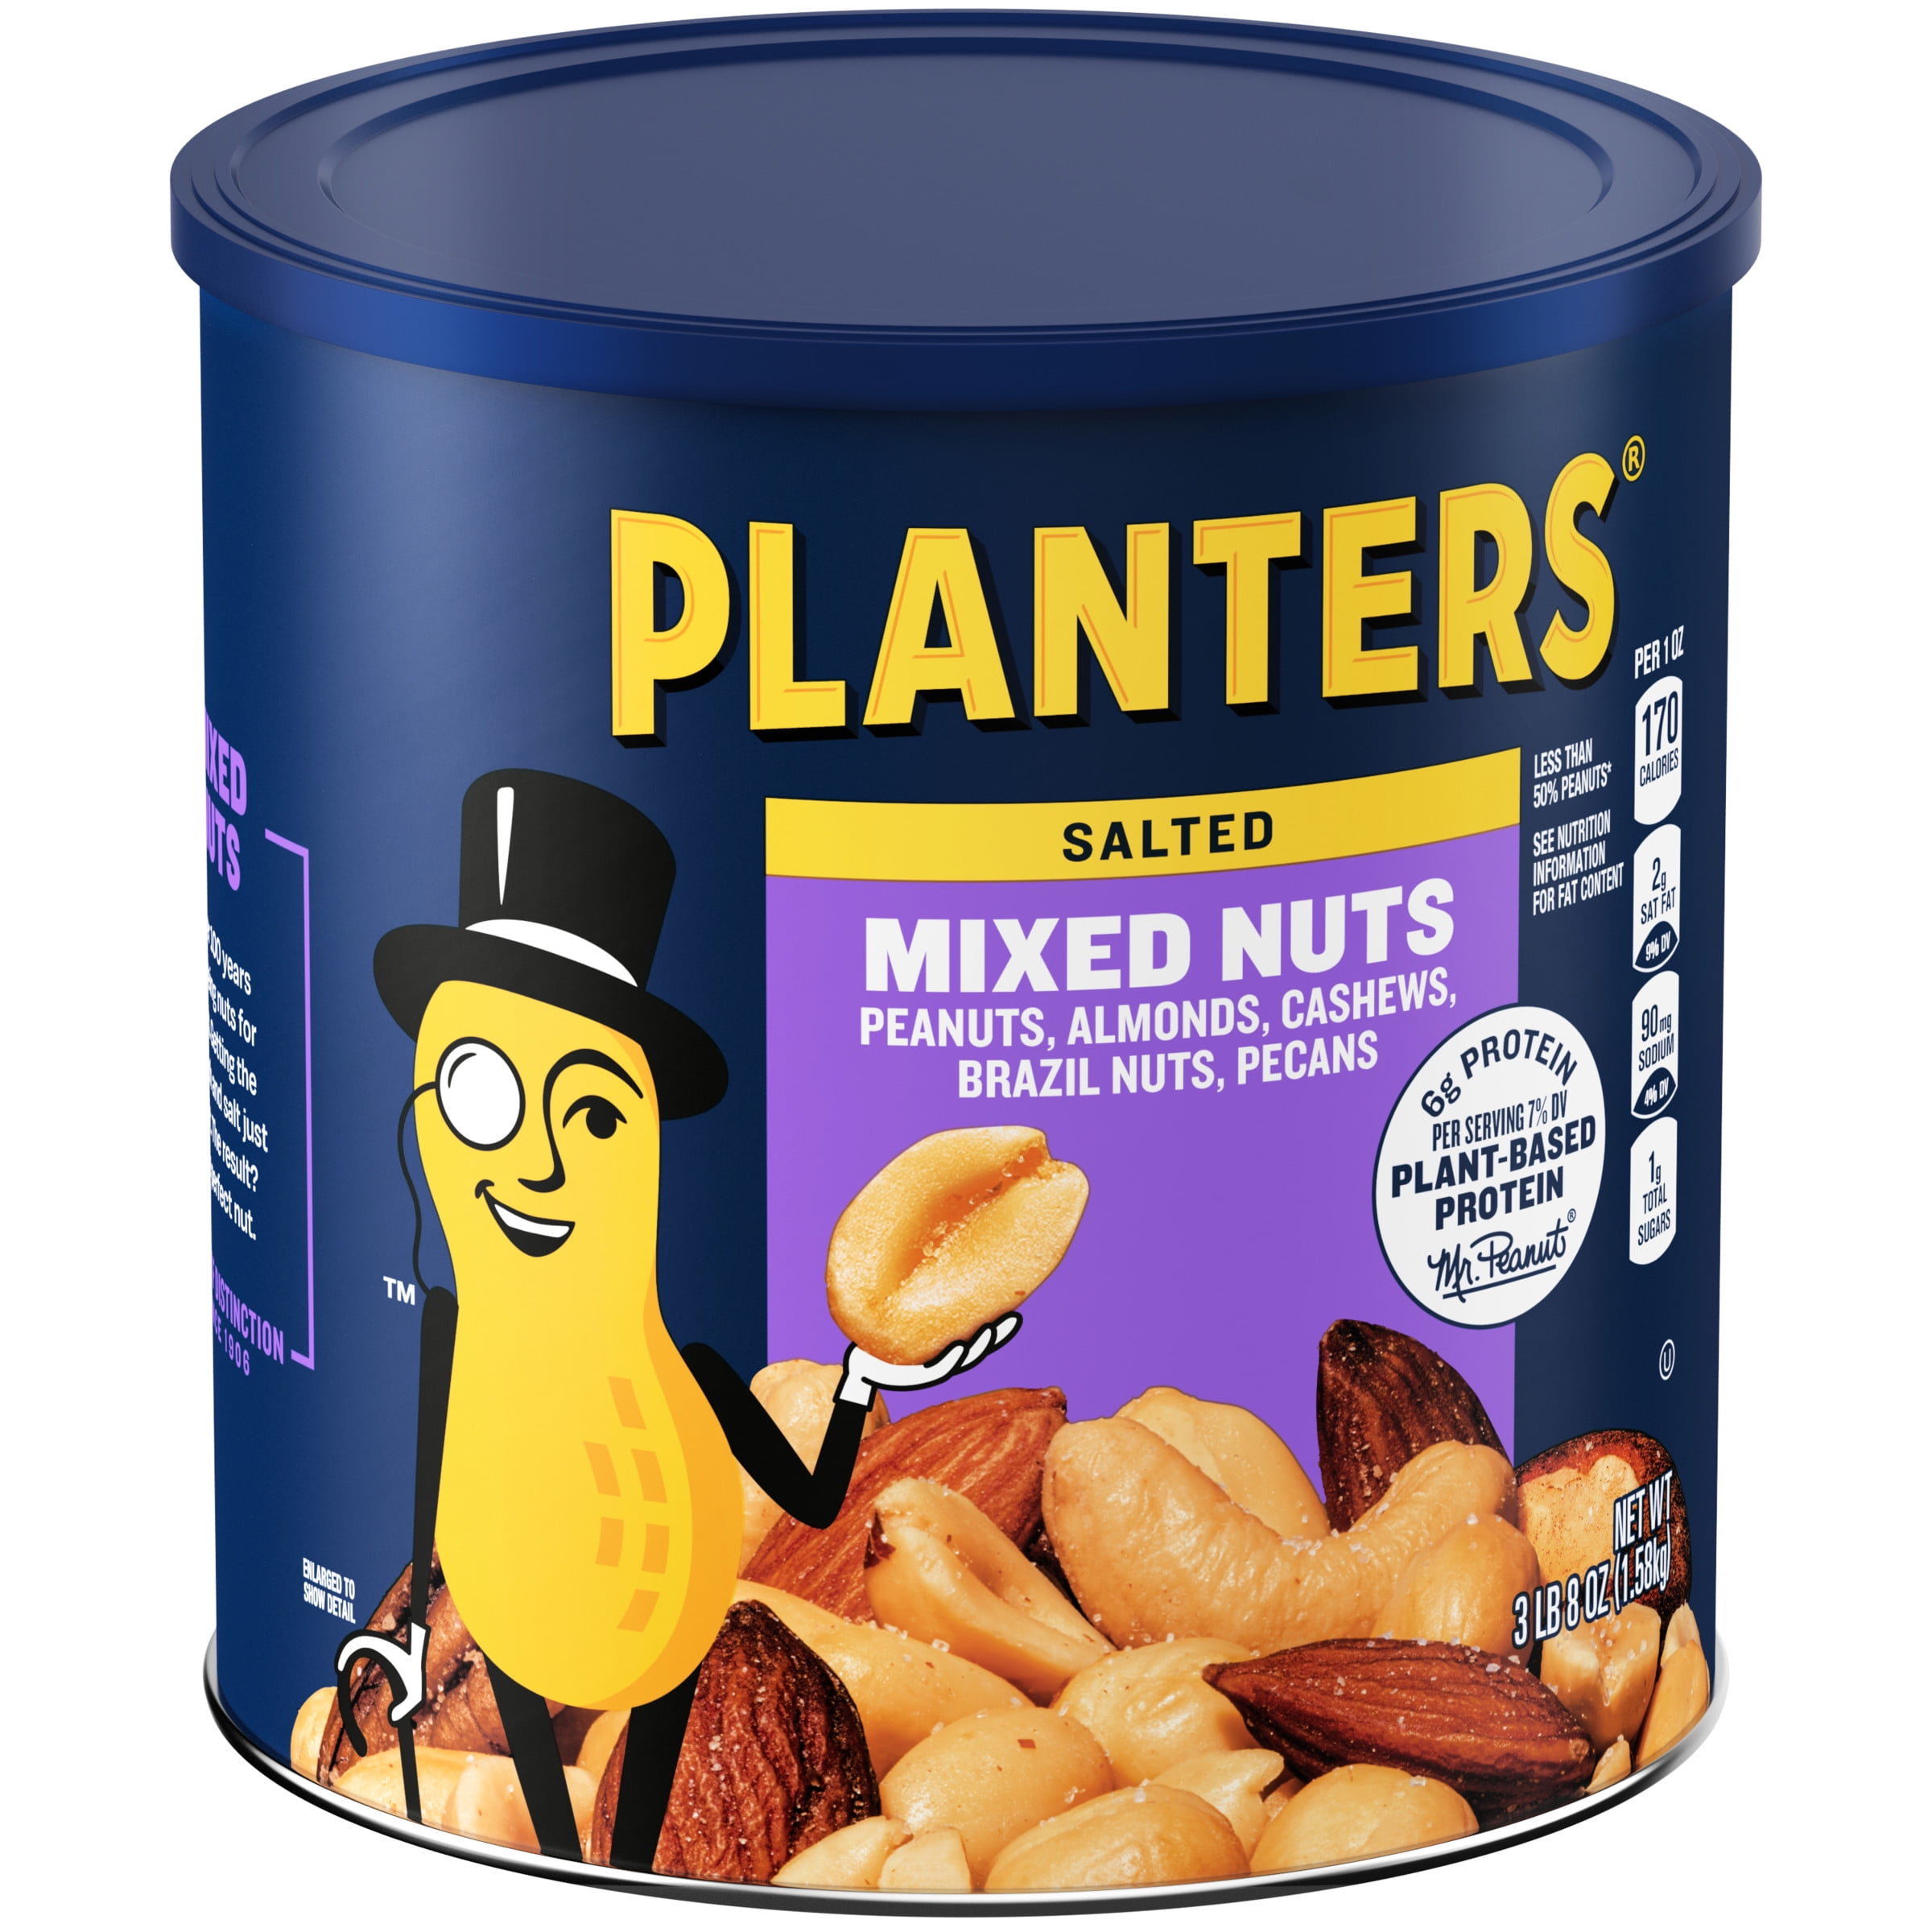 PLANTERS® A1 Sauce Flavored Roasted Deluxe Mixed Nuts 5.5 oz bag -  PLANTERS® Brand